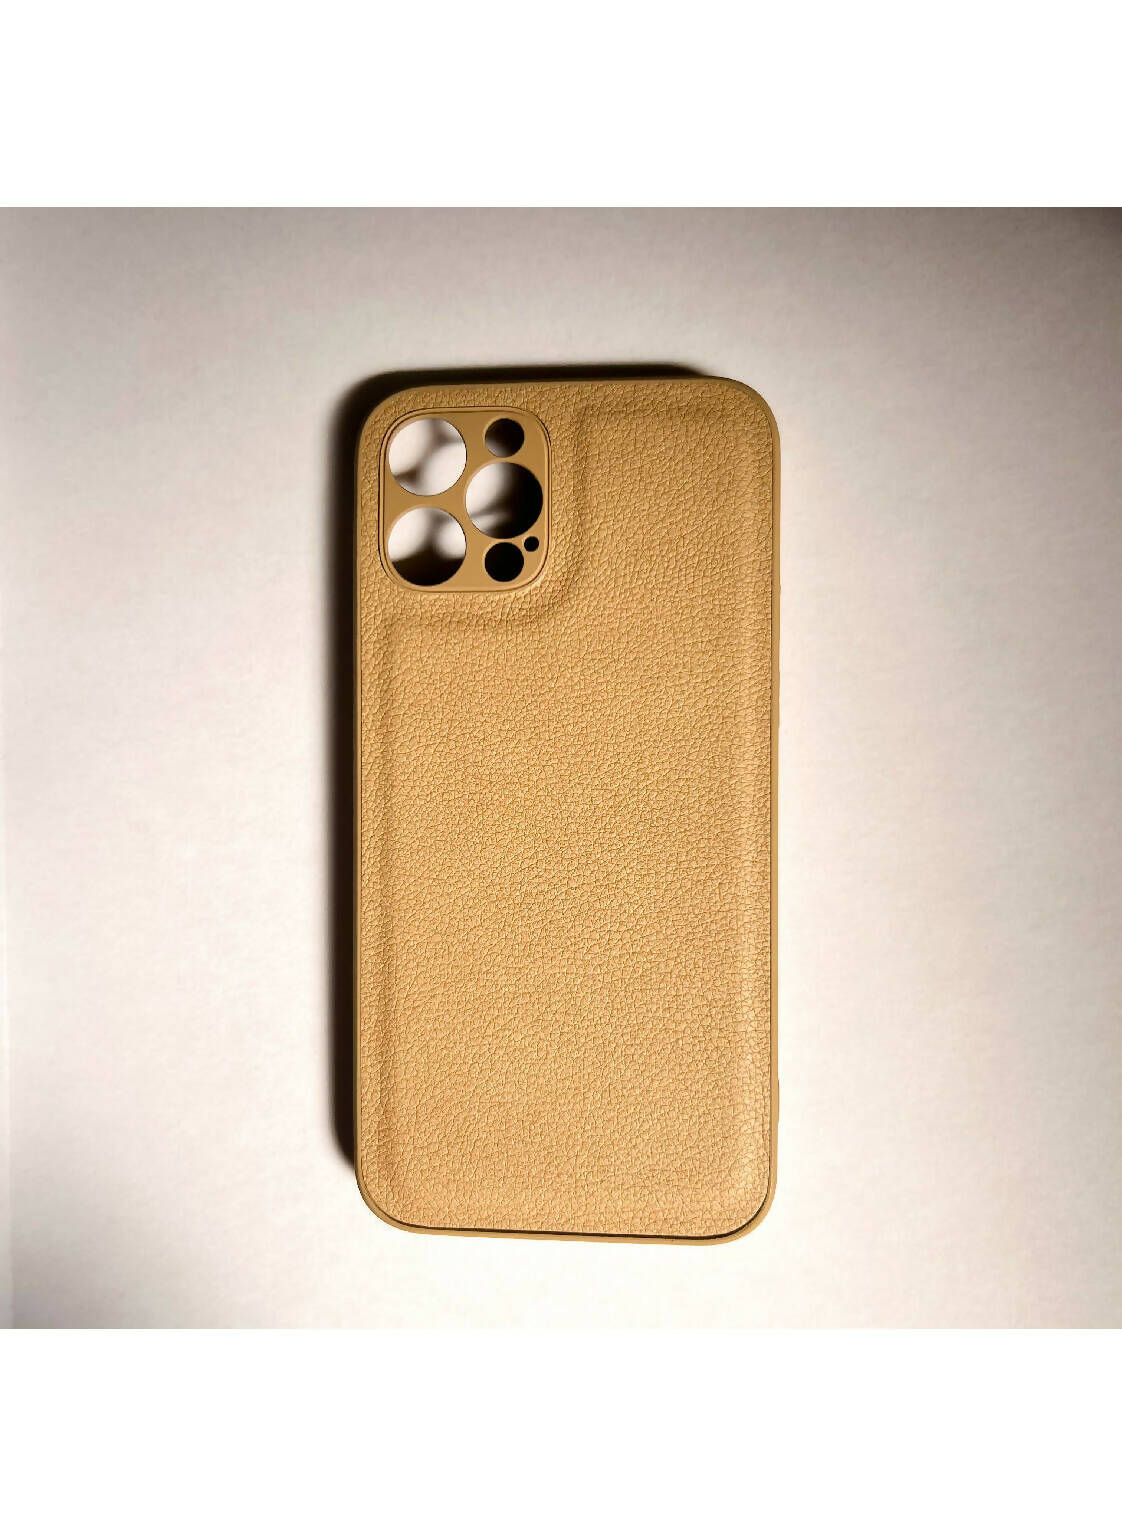 Lady iPhone Case - Brown